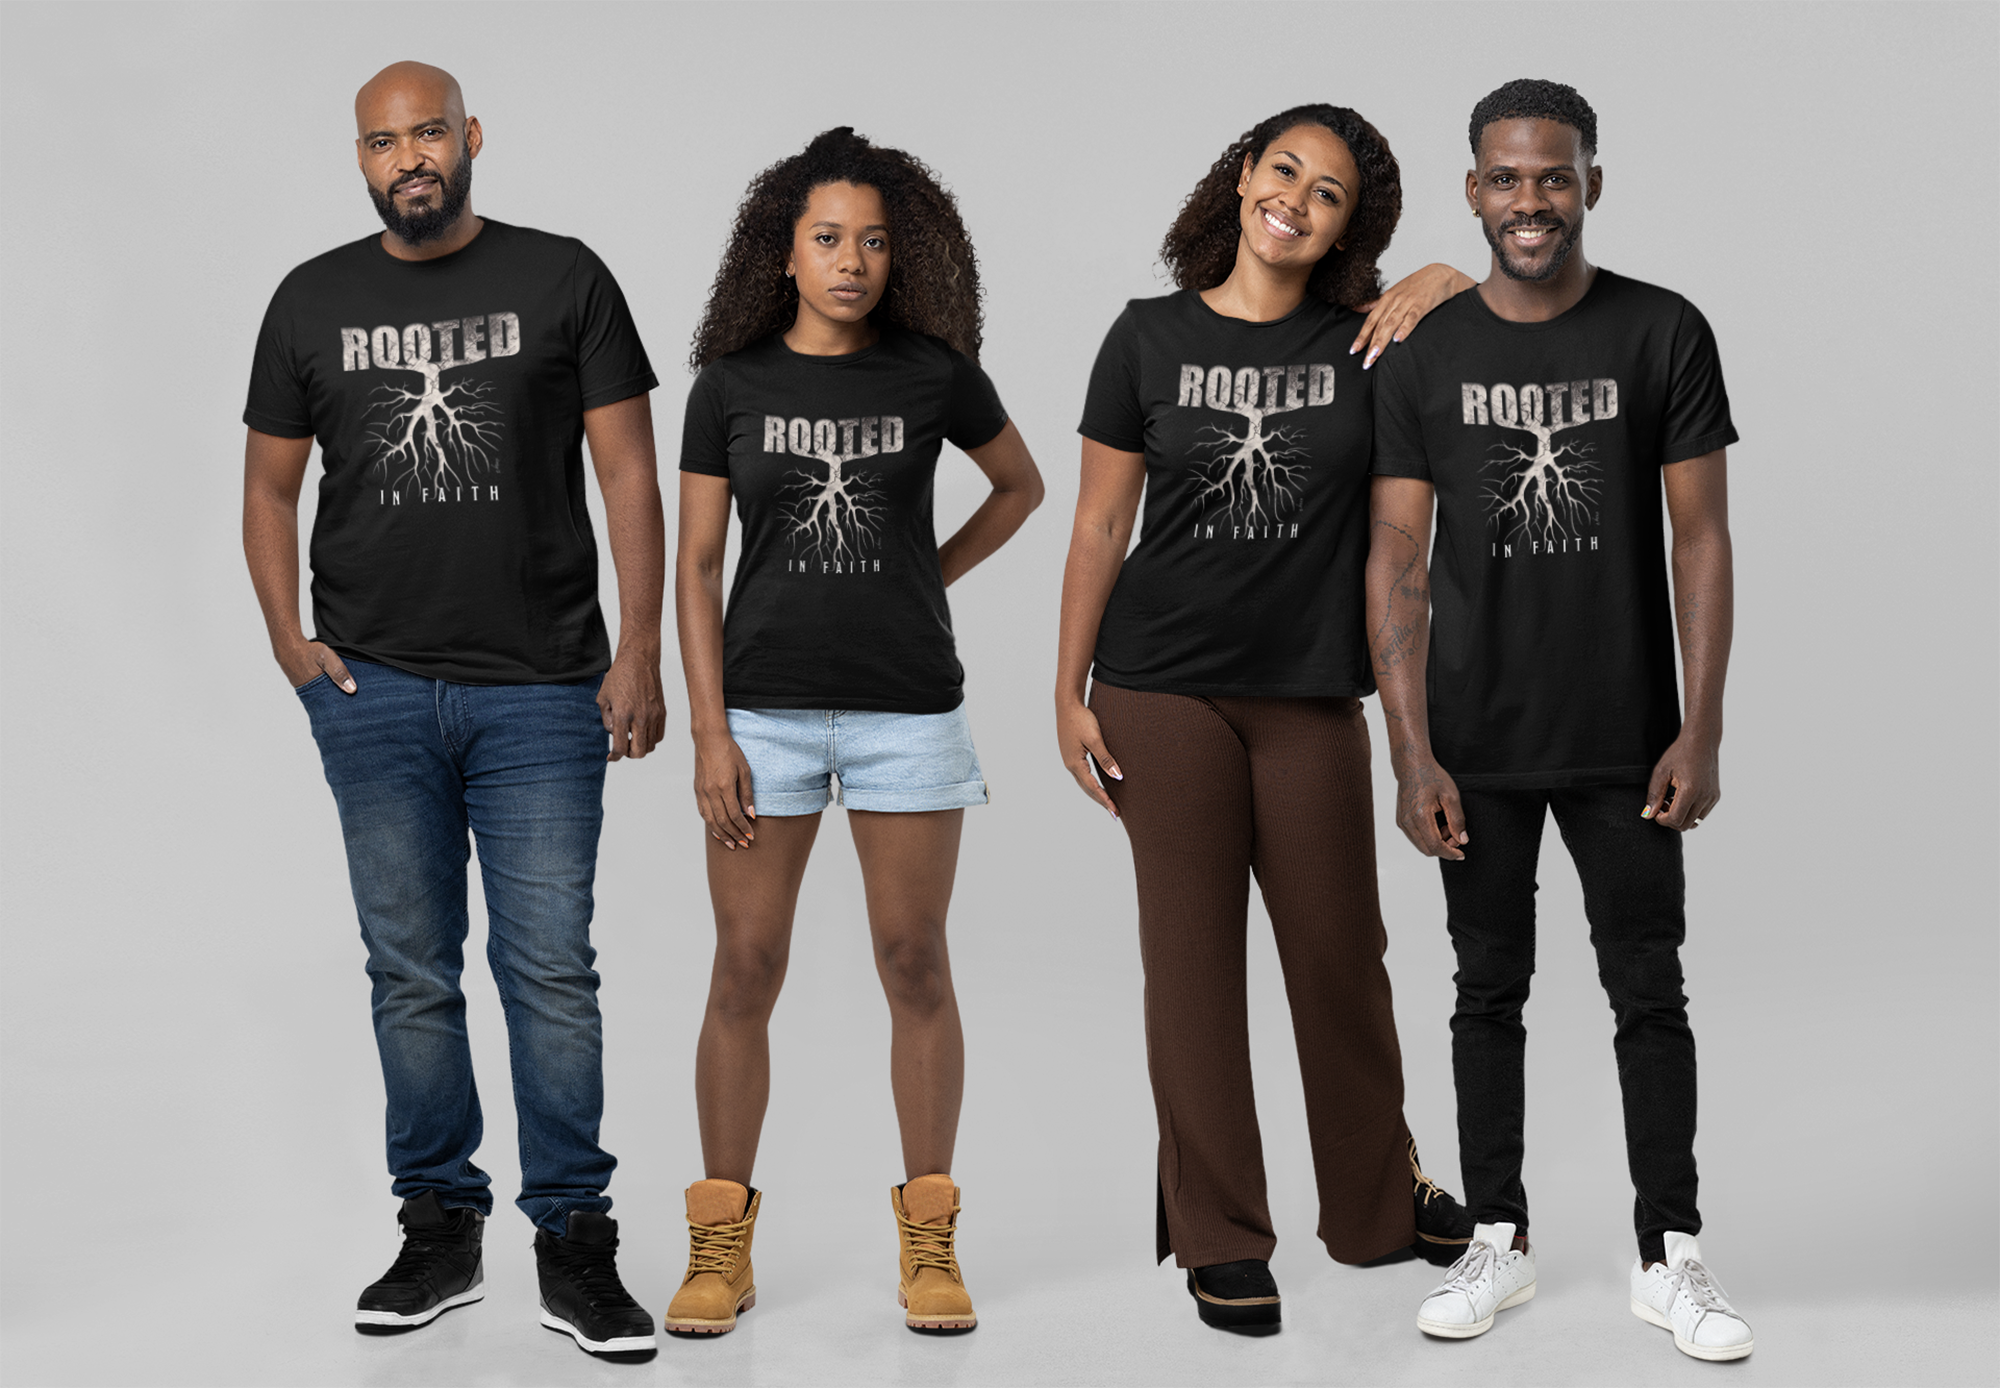 Rooted in Faith Black Cotton T-Shirt - Embrace Your Spiritual Journey in Style with this Comfortable and Meaningful Christian Apparel